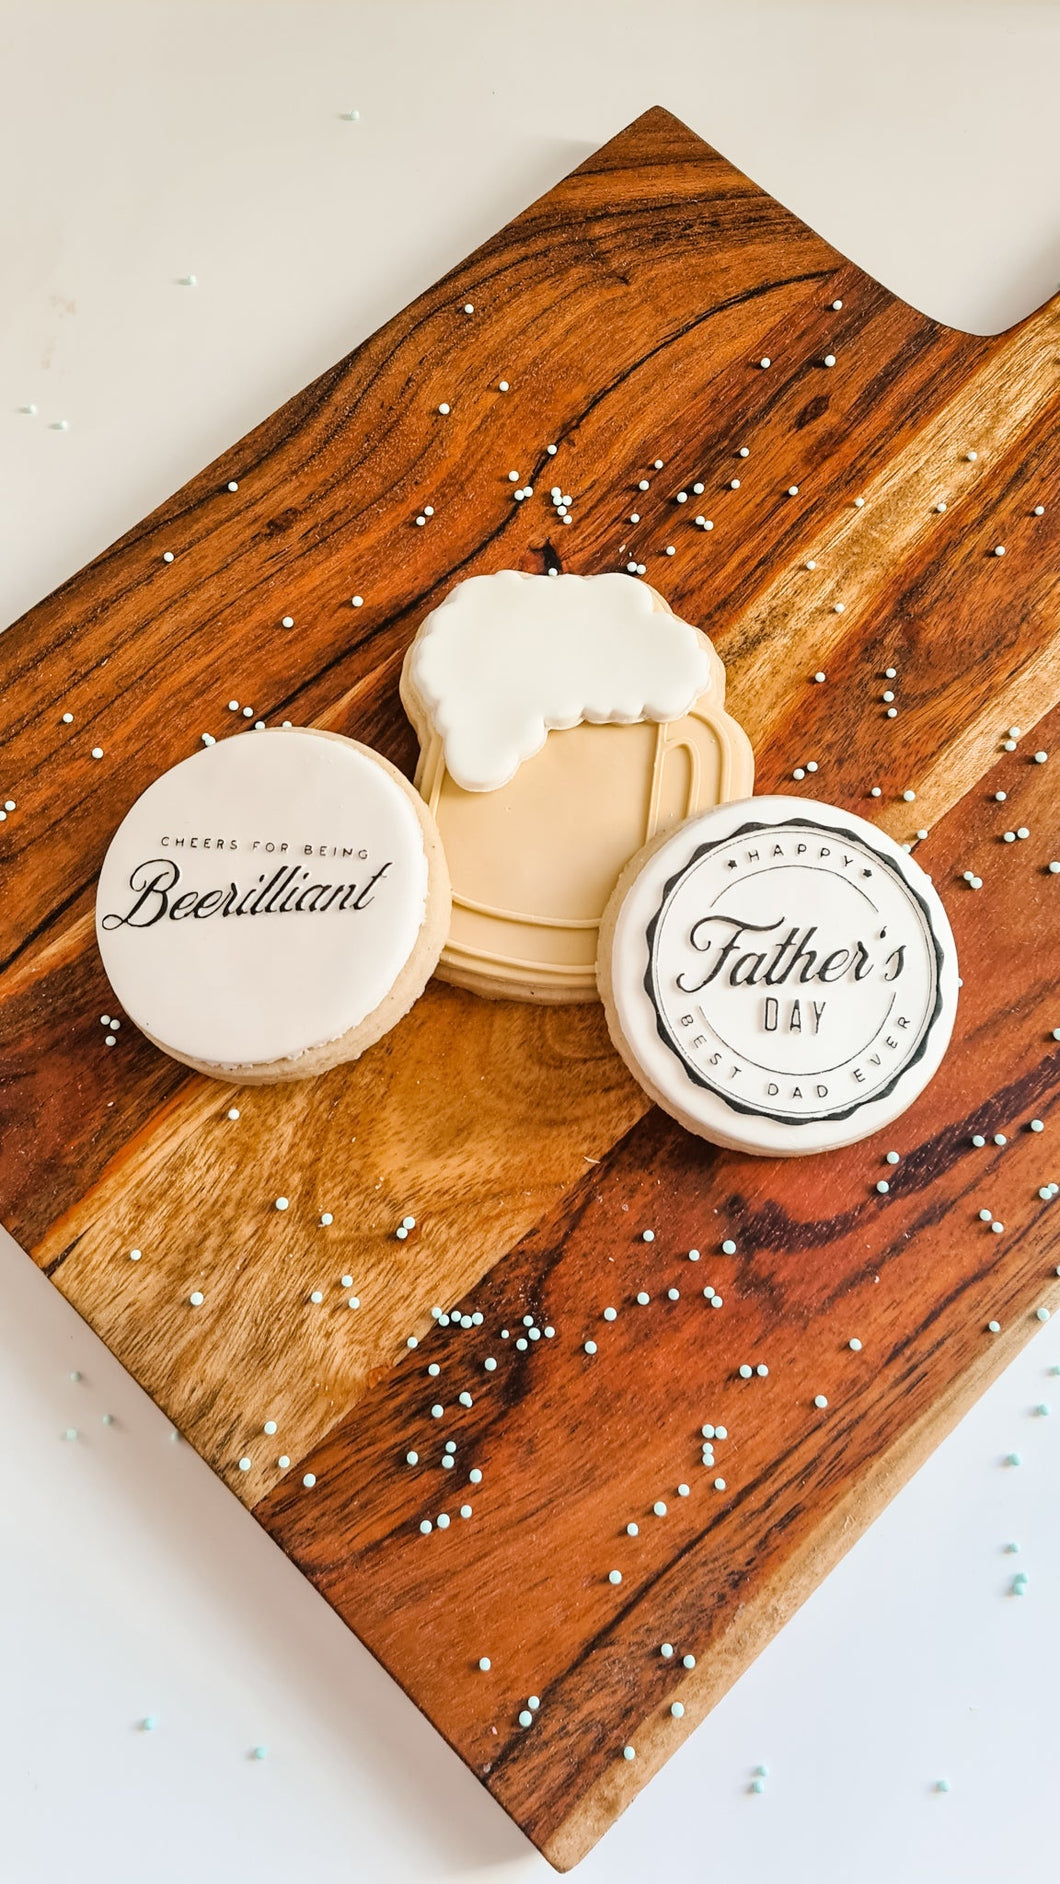 Vegan Cheers Dad! Father's Day Pack (3 cookies)